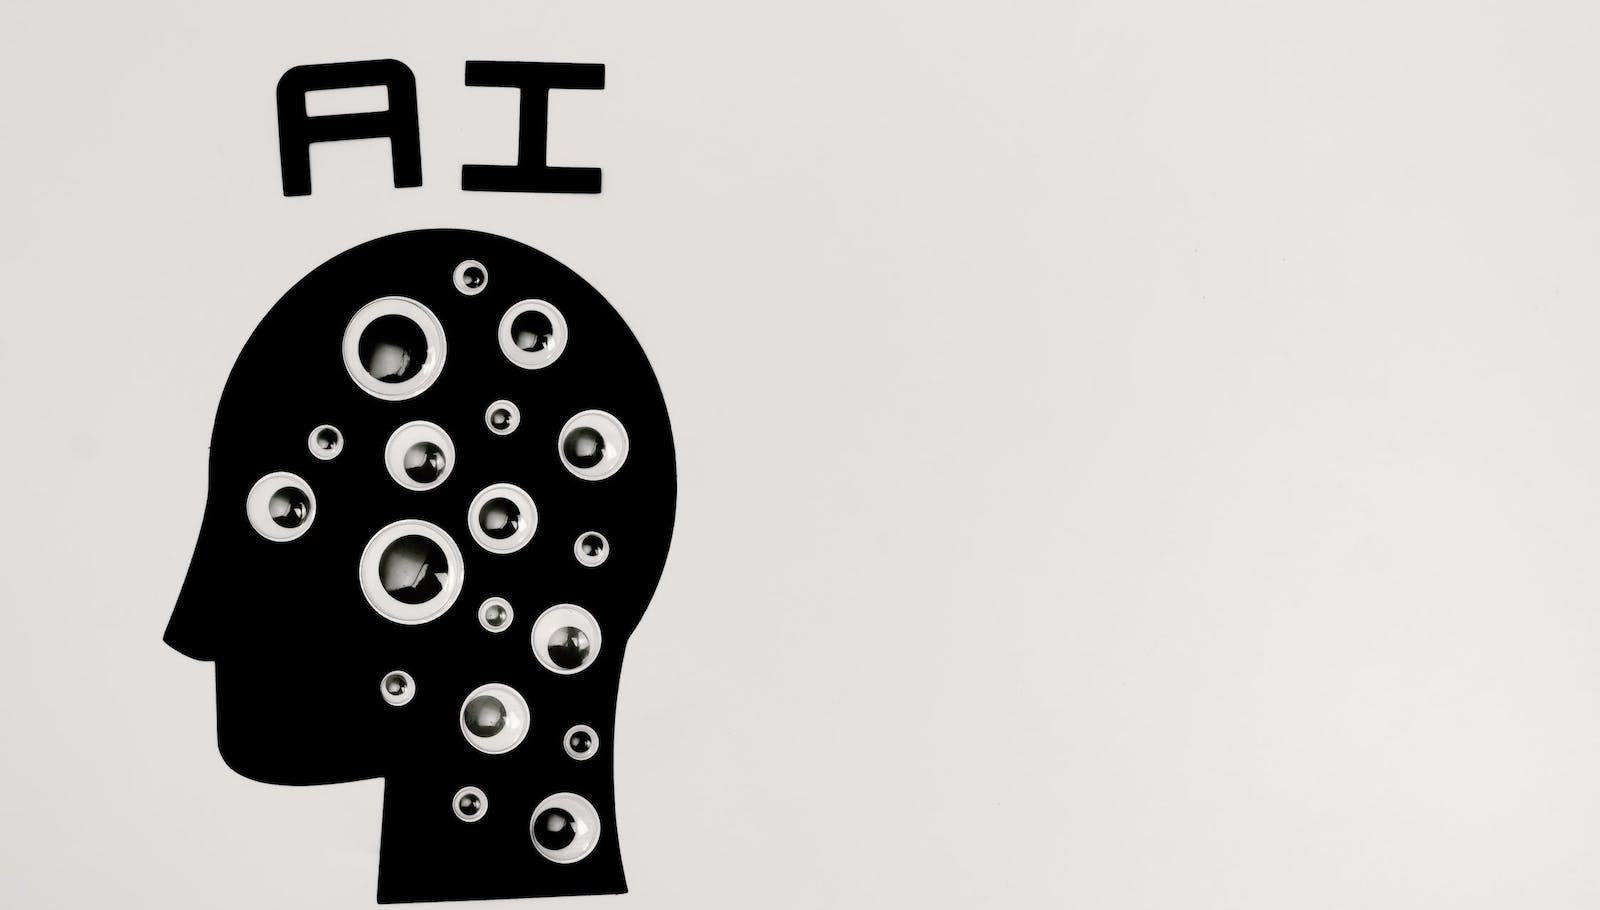 An image of a black side profile drawing against a gray background with the letters "AI" above the head